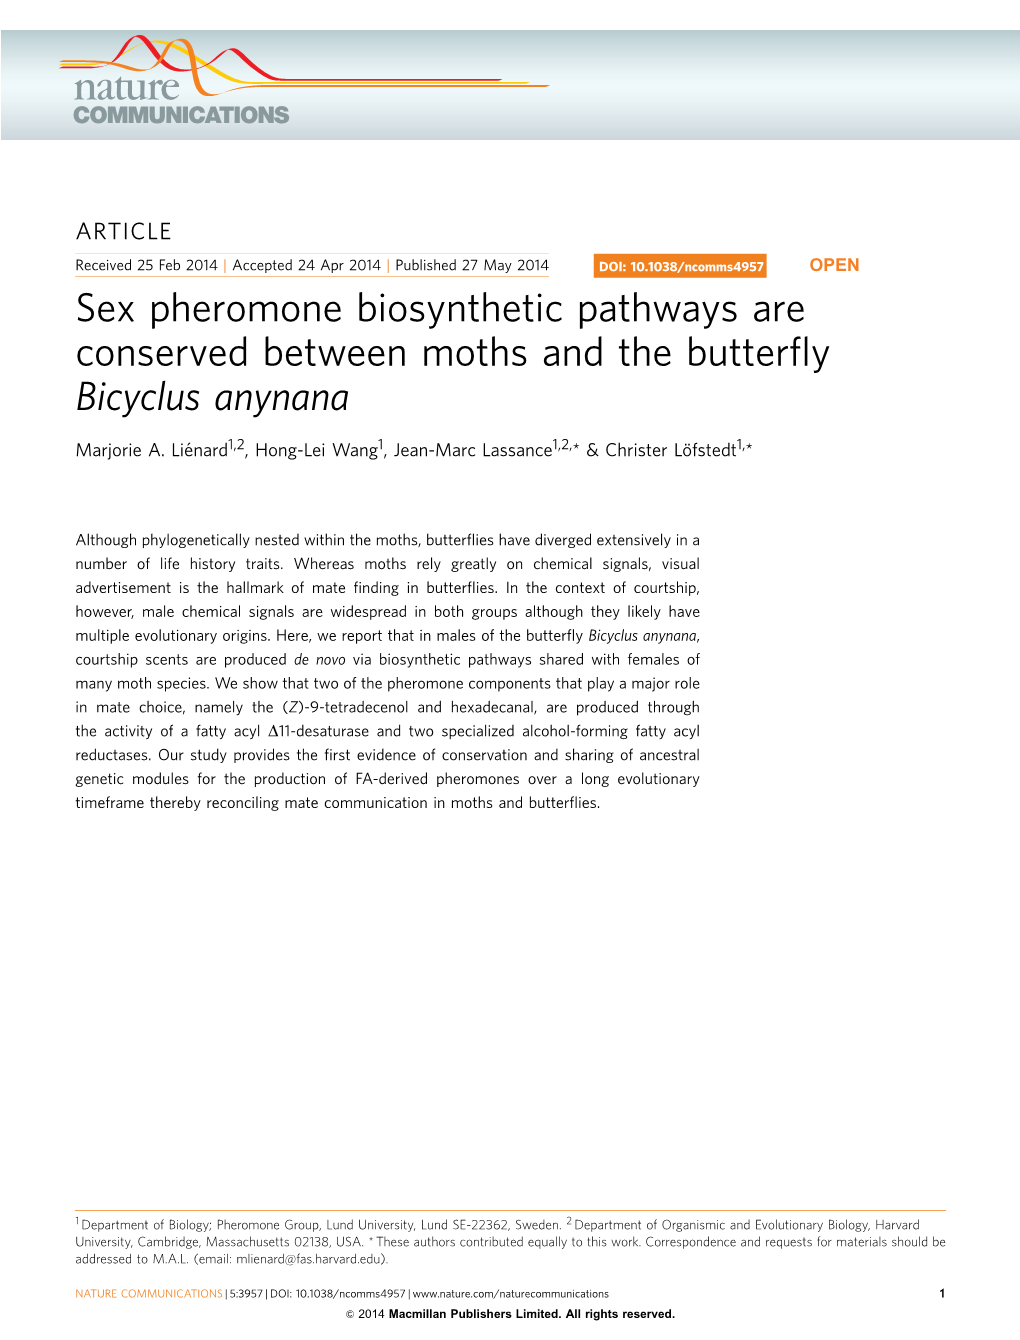 Sex Pheromone Biosynthetic Pathways Are Conserved Between Moths and the Butterﬂy Bicyclus Anynana